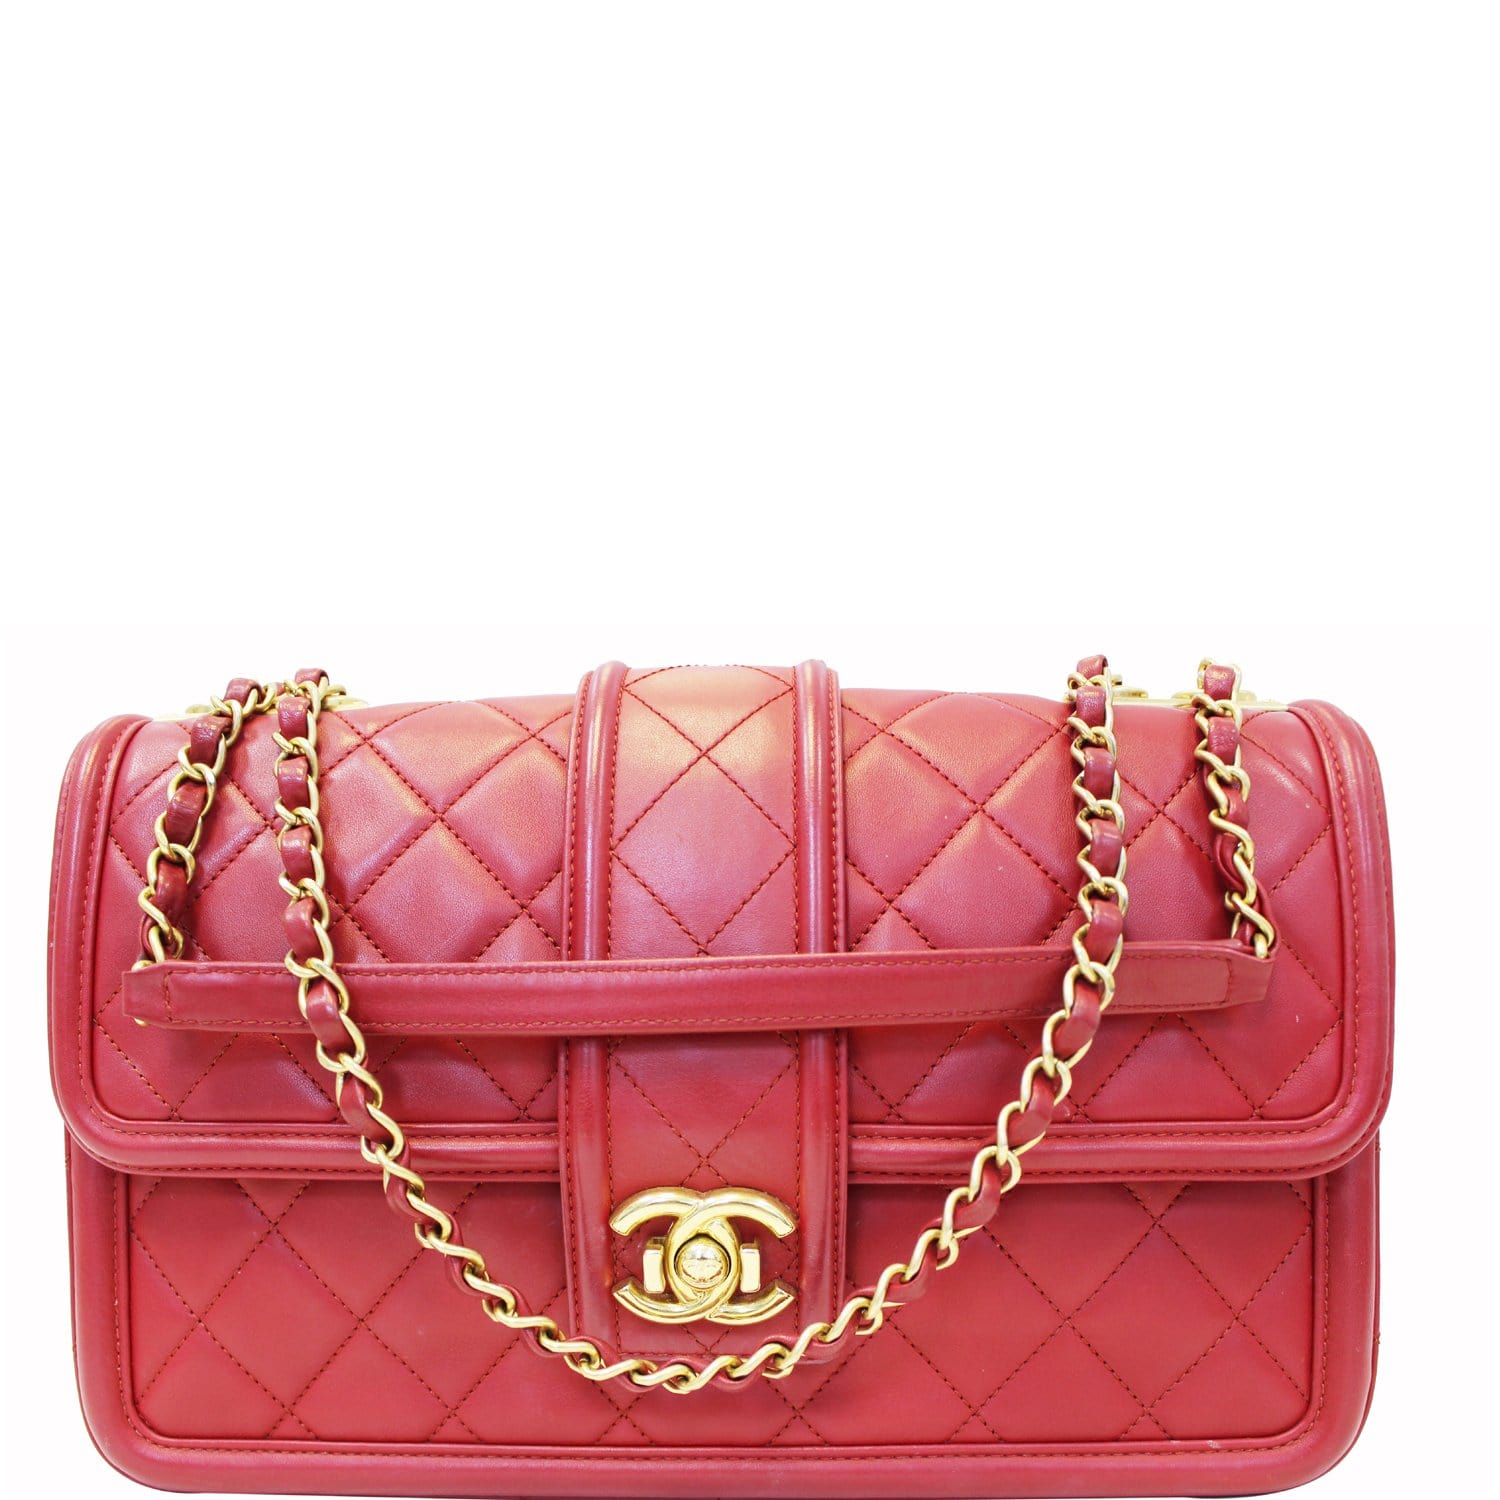 Chanel Red Lambskin Large Trendy CC Top Handle Flap Bag